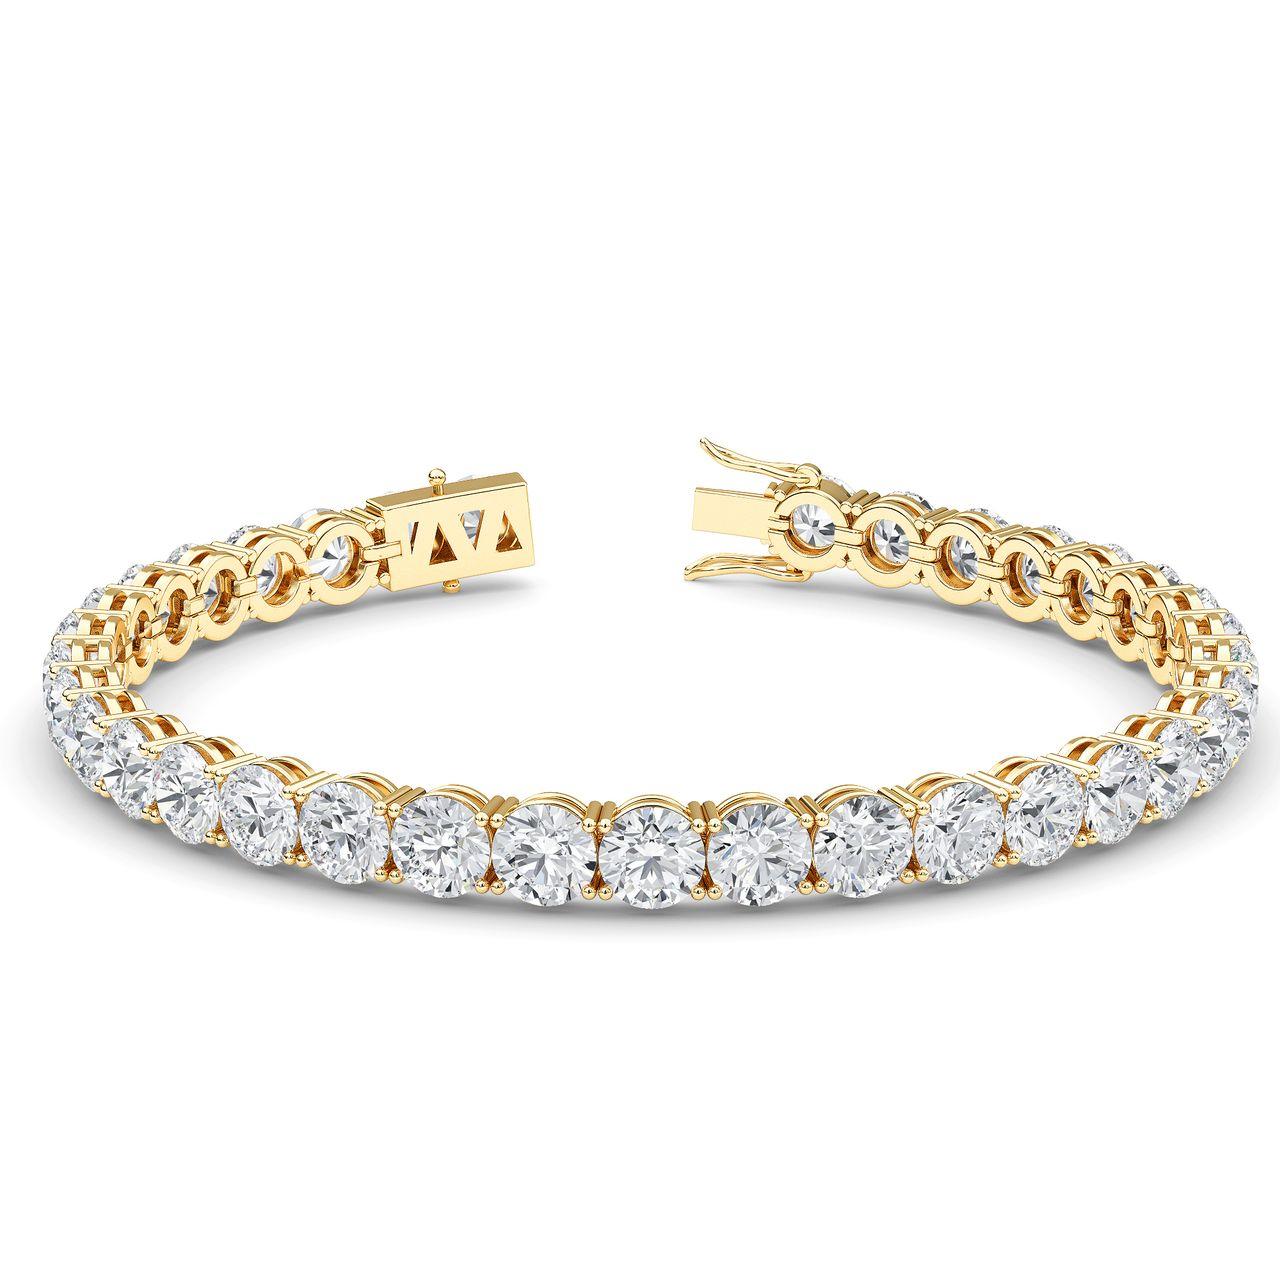 This exquisite tennis bracelet is a true statement piece, featuring a total of 36 dazzling Natural Round Brilliant Cut Diamonds set in a rich 14K Yellow Gold setting. Here are the captivating details:
Total Carat Weight: 10.69 carats, showcasing an